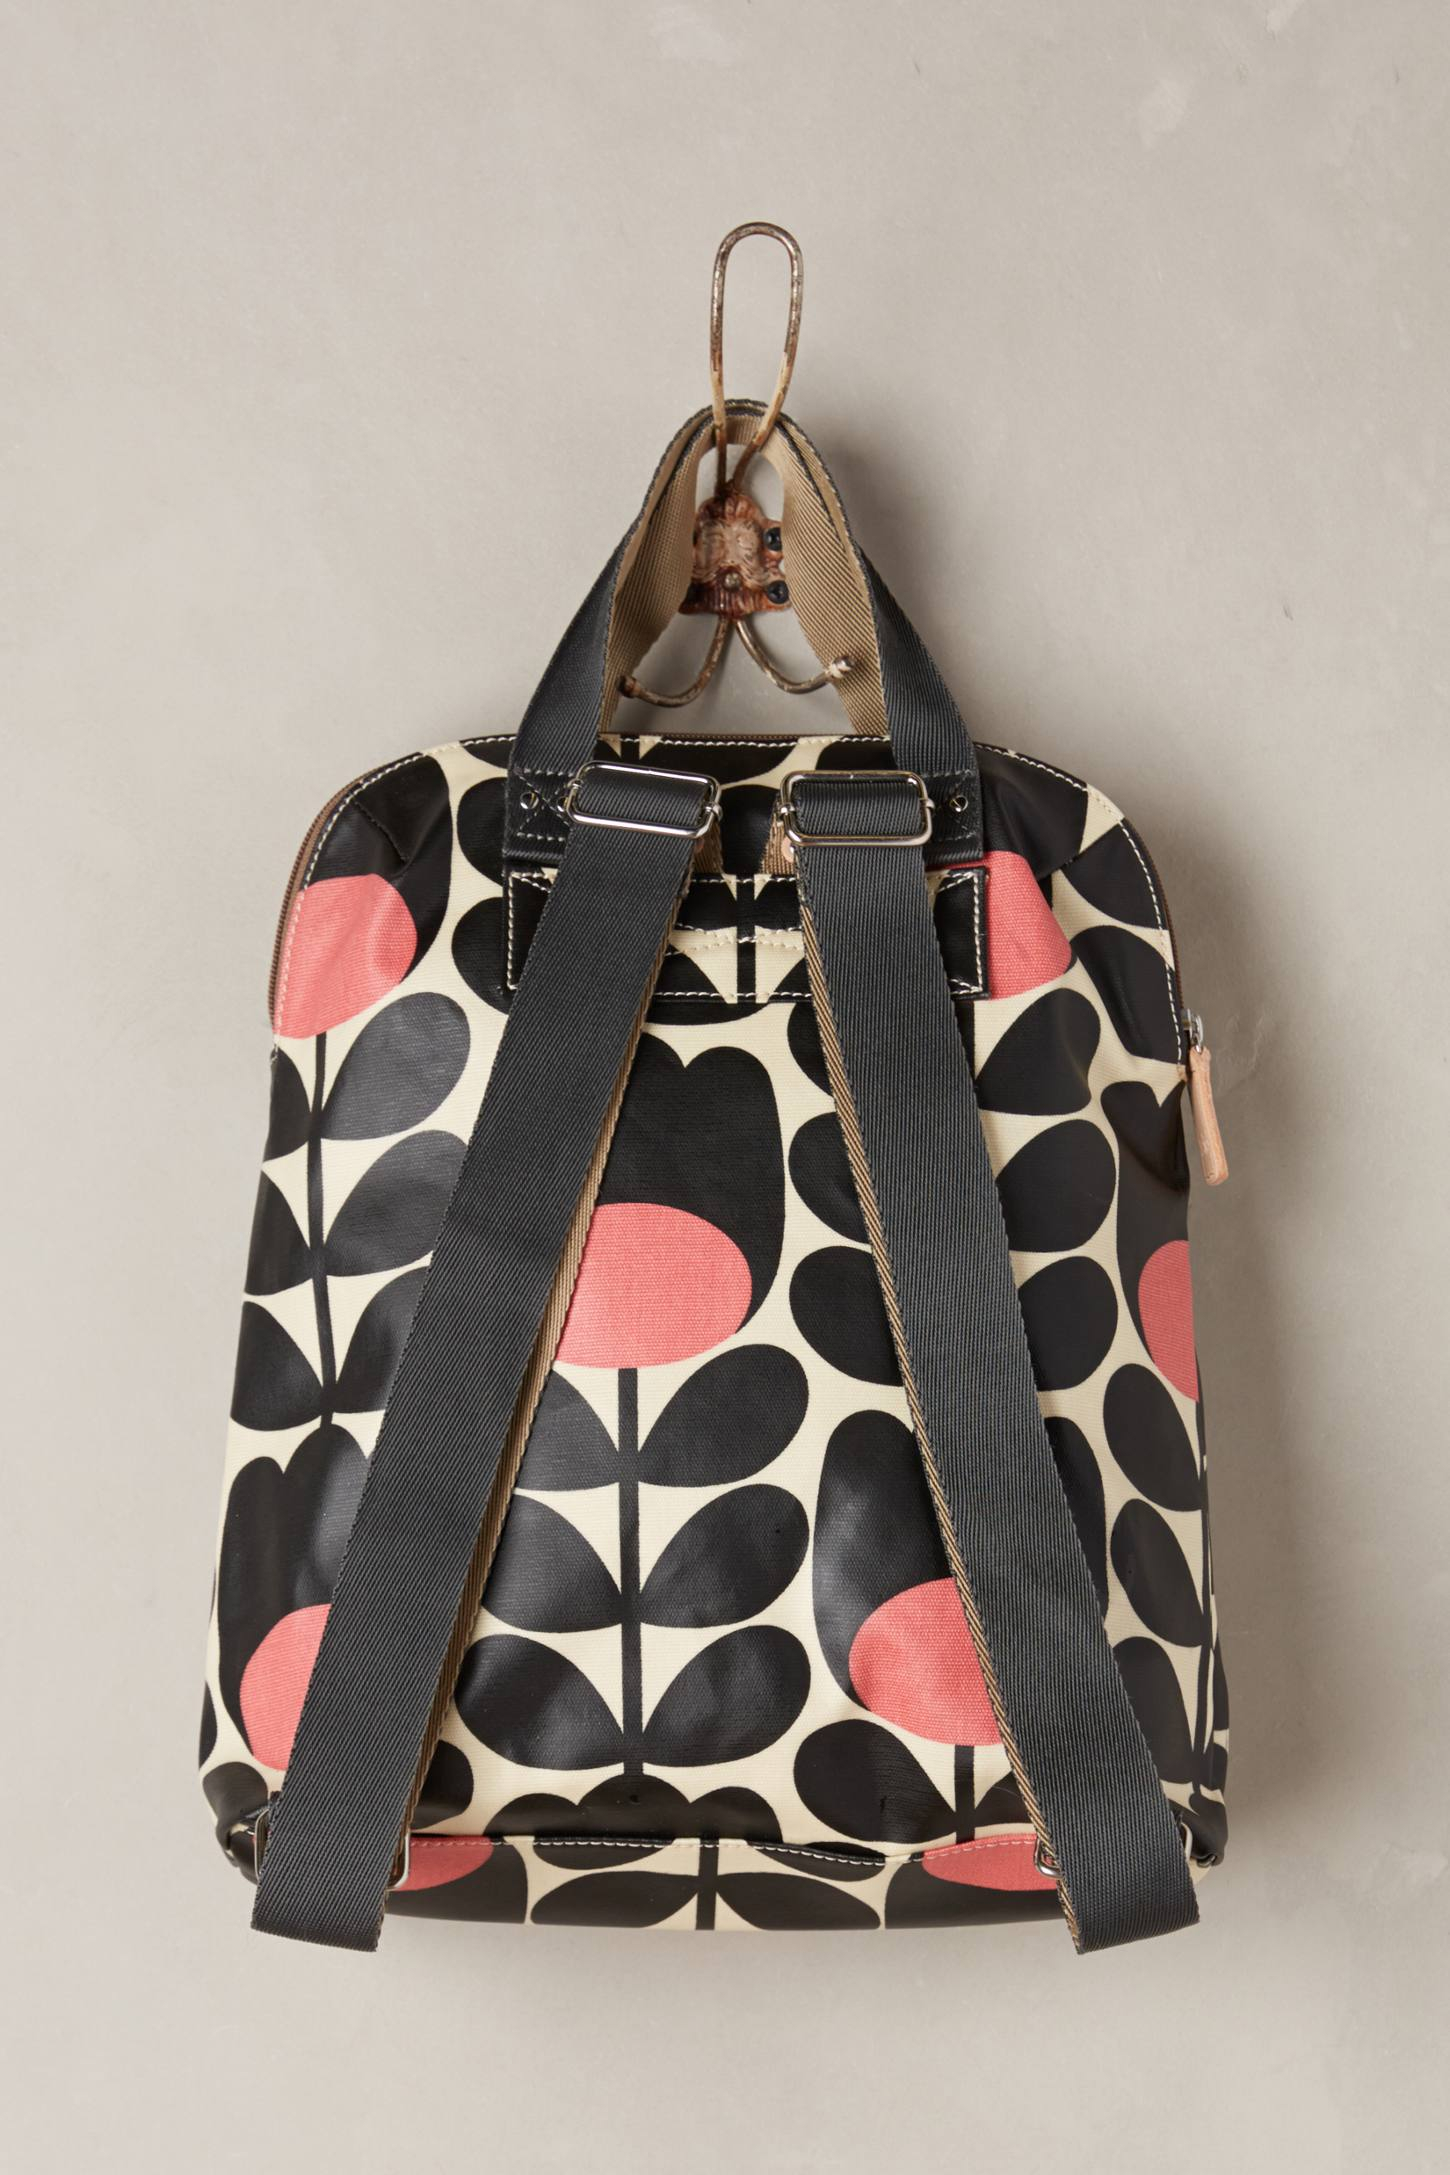 Orla Kiely Gray Tulip Stem Backpack Product 1 23781410 1 449503466 Normal 